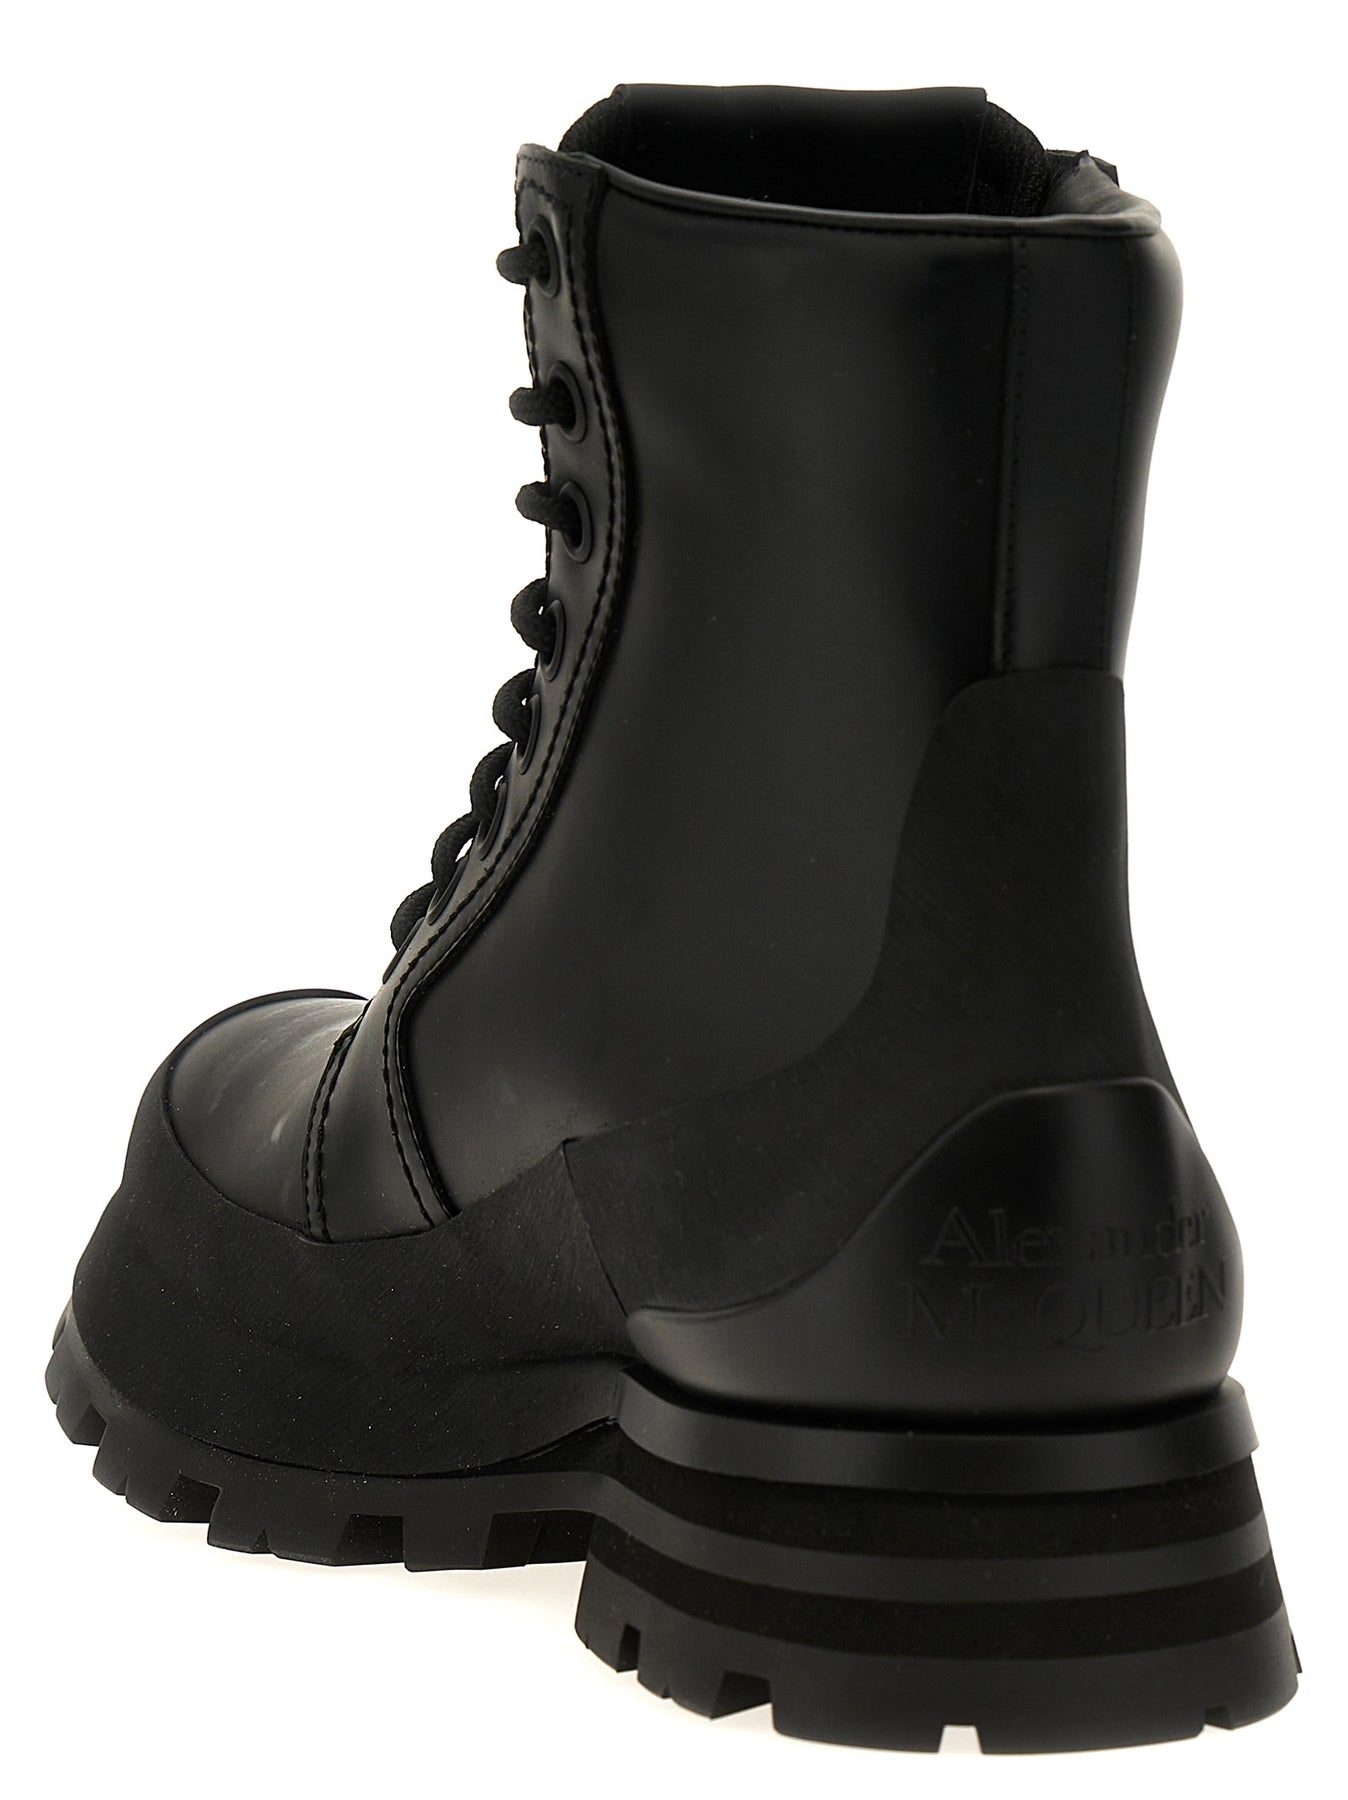 Wander Boots, Ankle Boots Black - 3